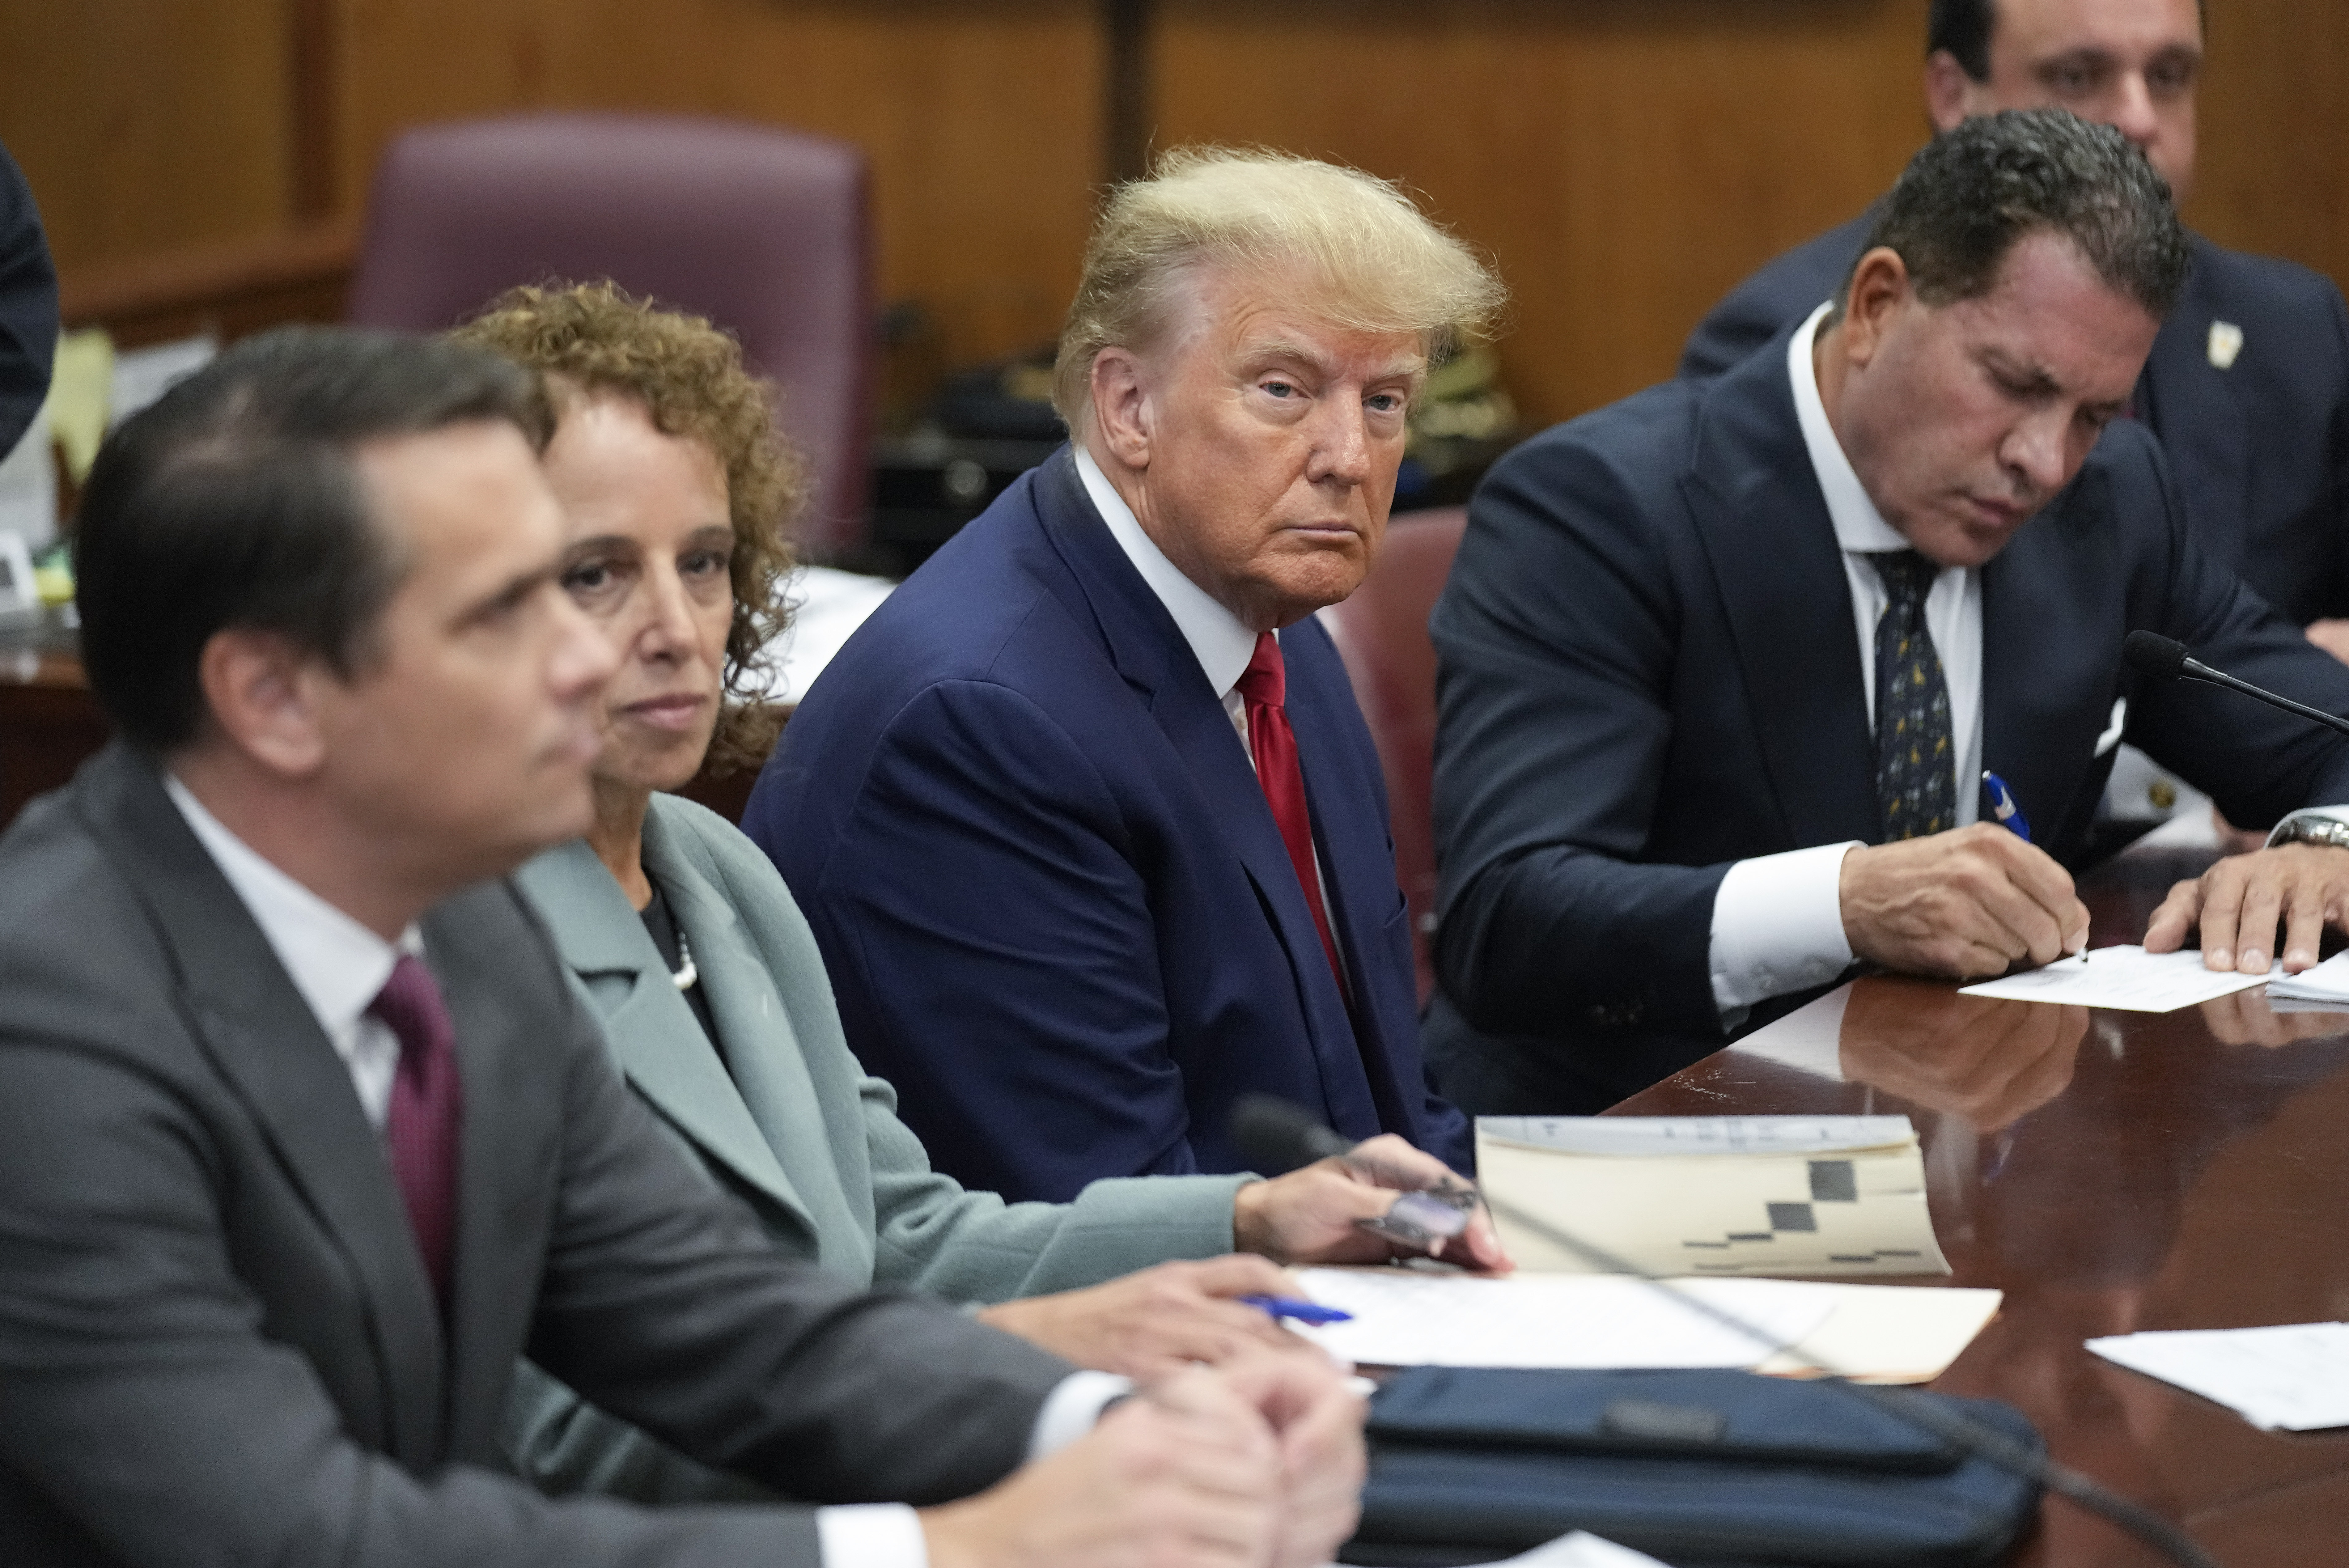 Trump in a blue suit, white shirt, and red tie, sits among a cluster of dark-suited lawyers, looking sternly at the photographer.